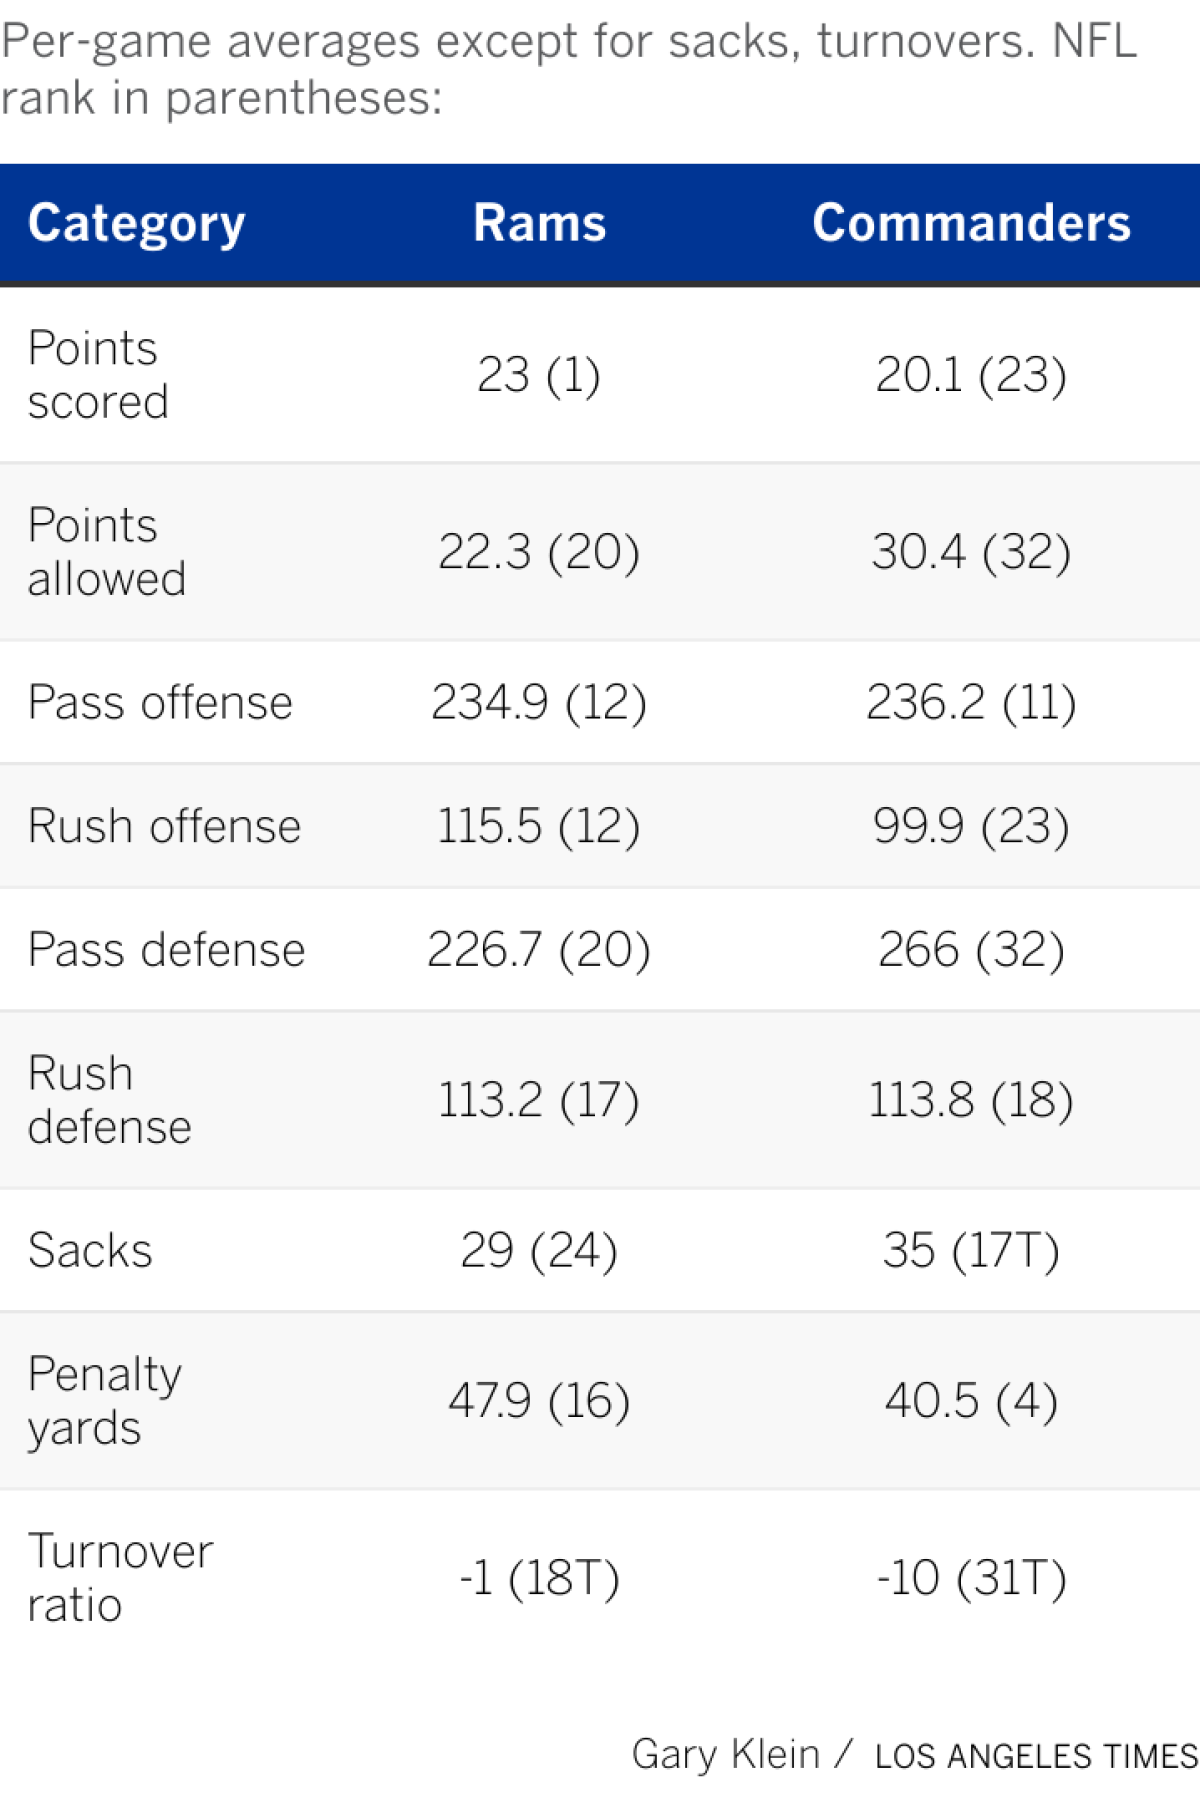 Breaking down the top team statistics for both the Rams and the Commanders.